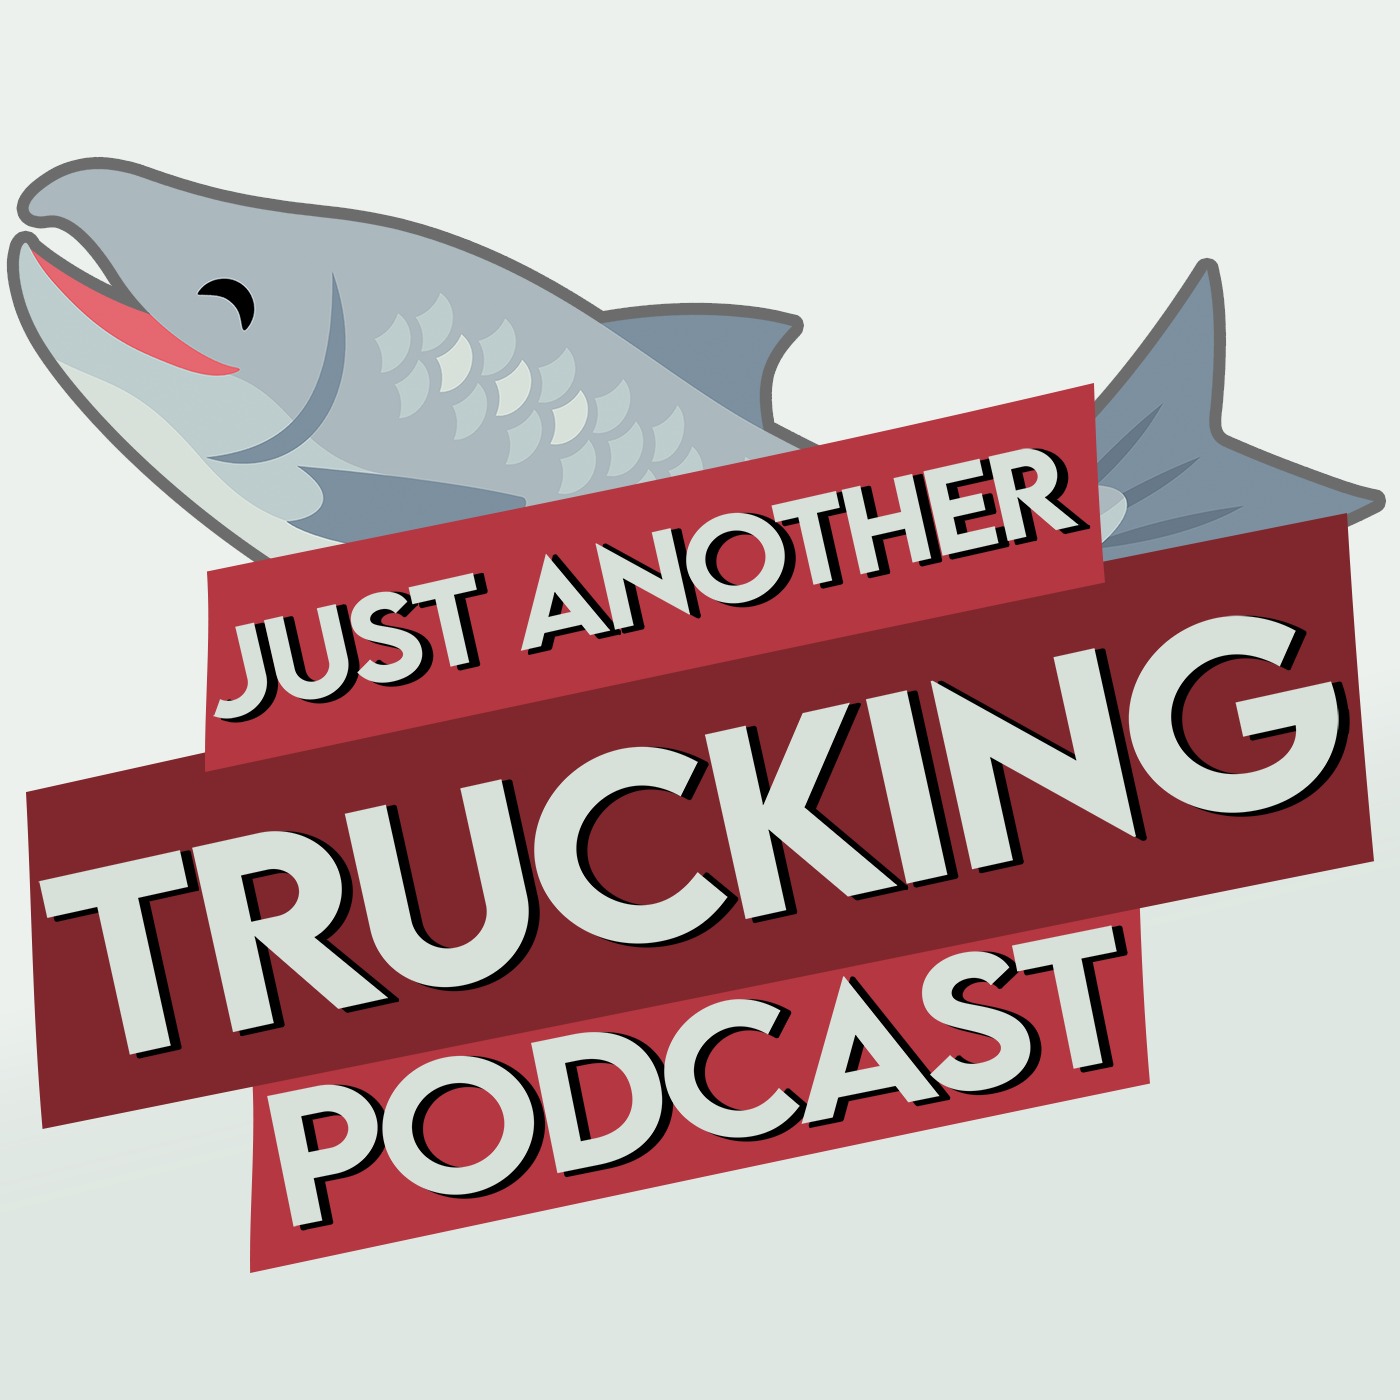 The howling squirrel | Just another trucking podcast